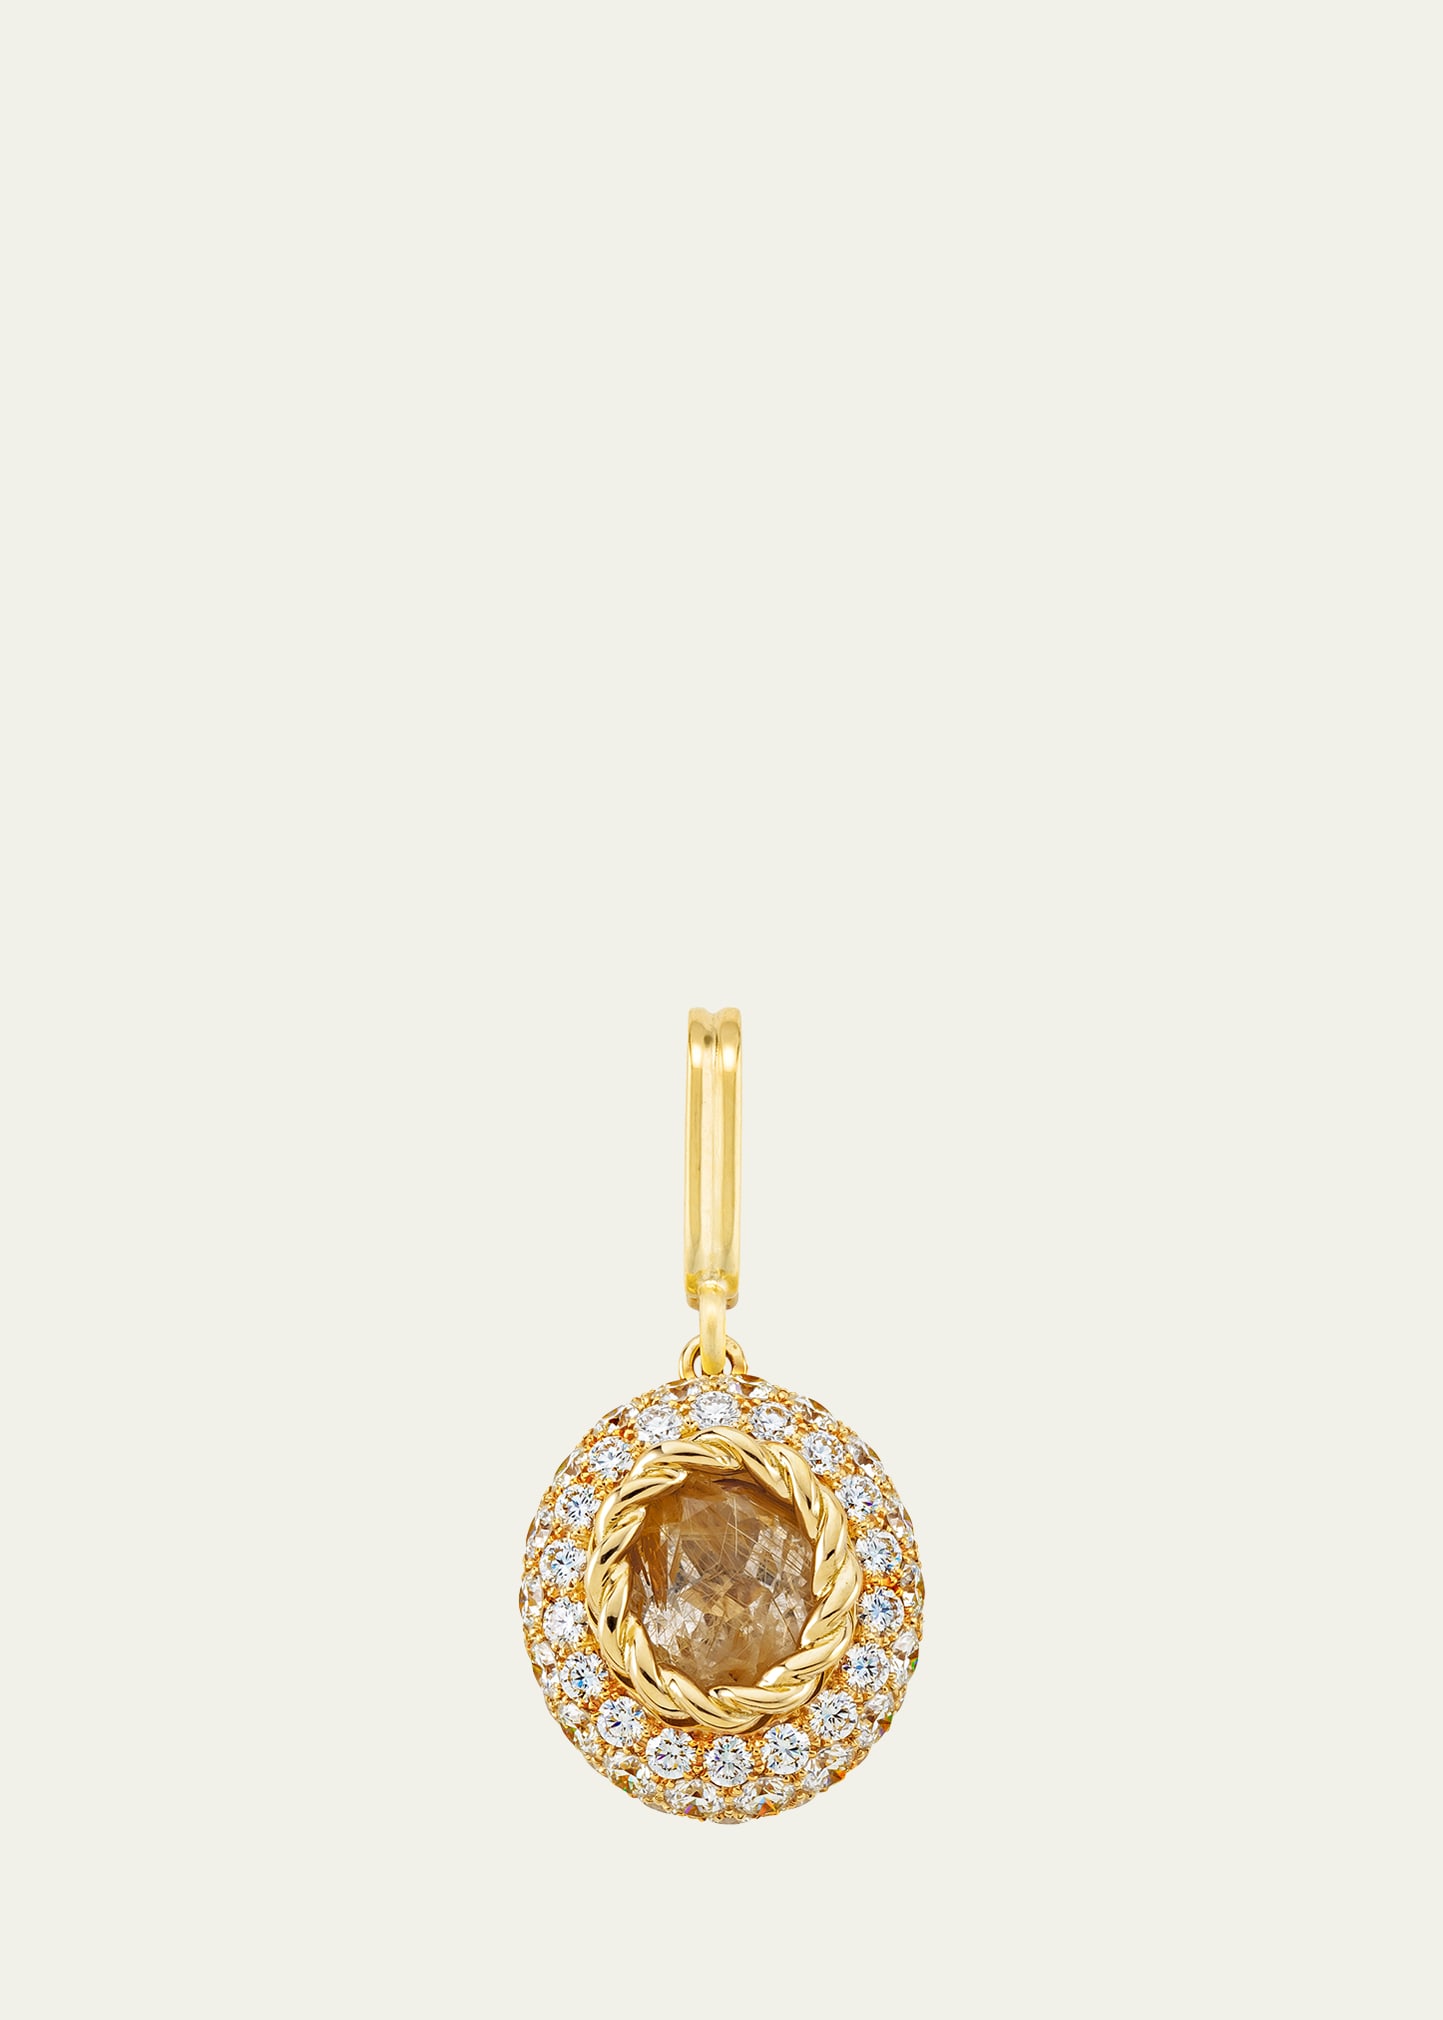 Mellerio 18k Yellow Gold Baby Queen Medal Charm With Rutilated Quartz And Diamonds